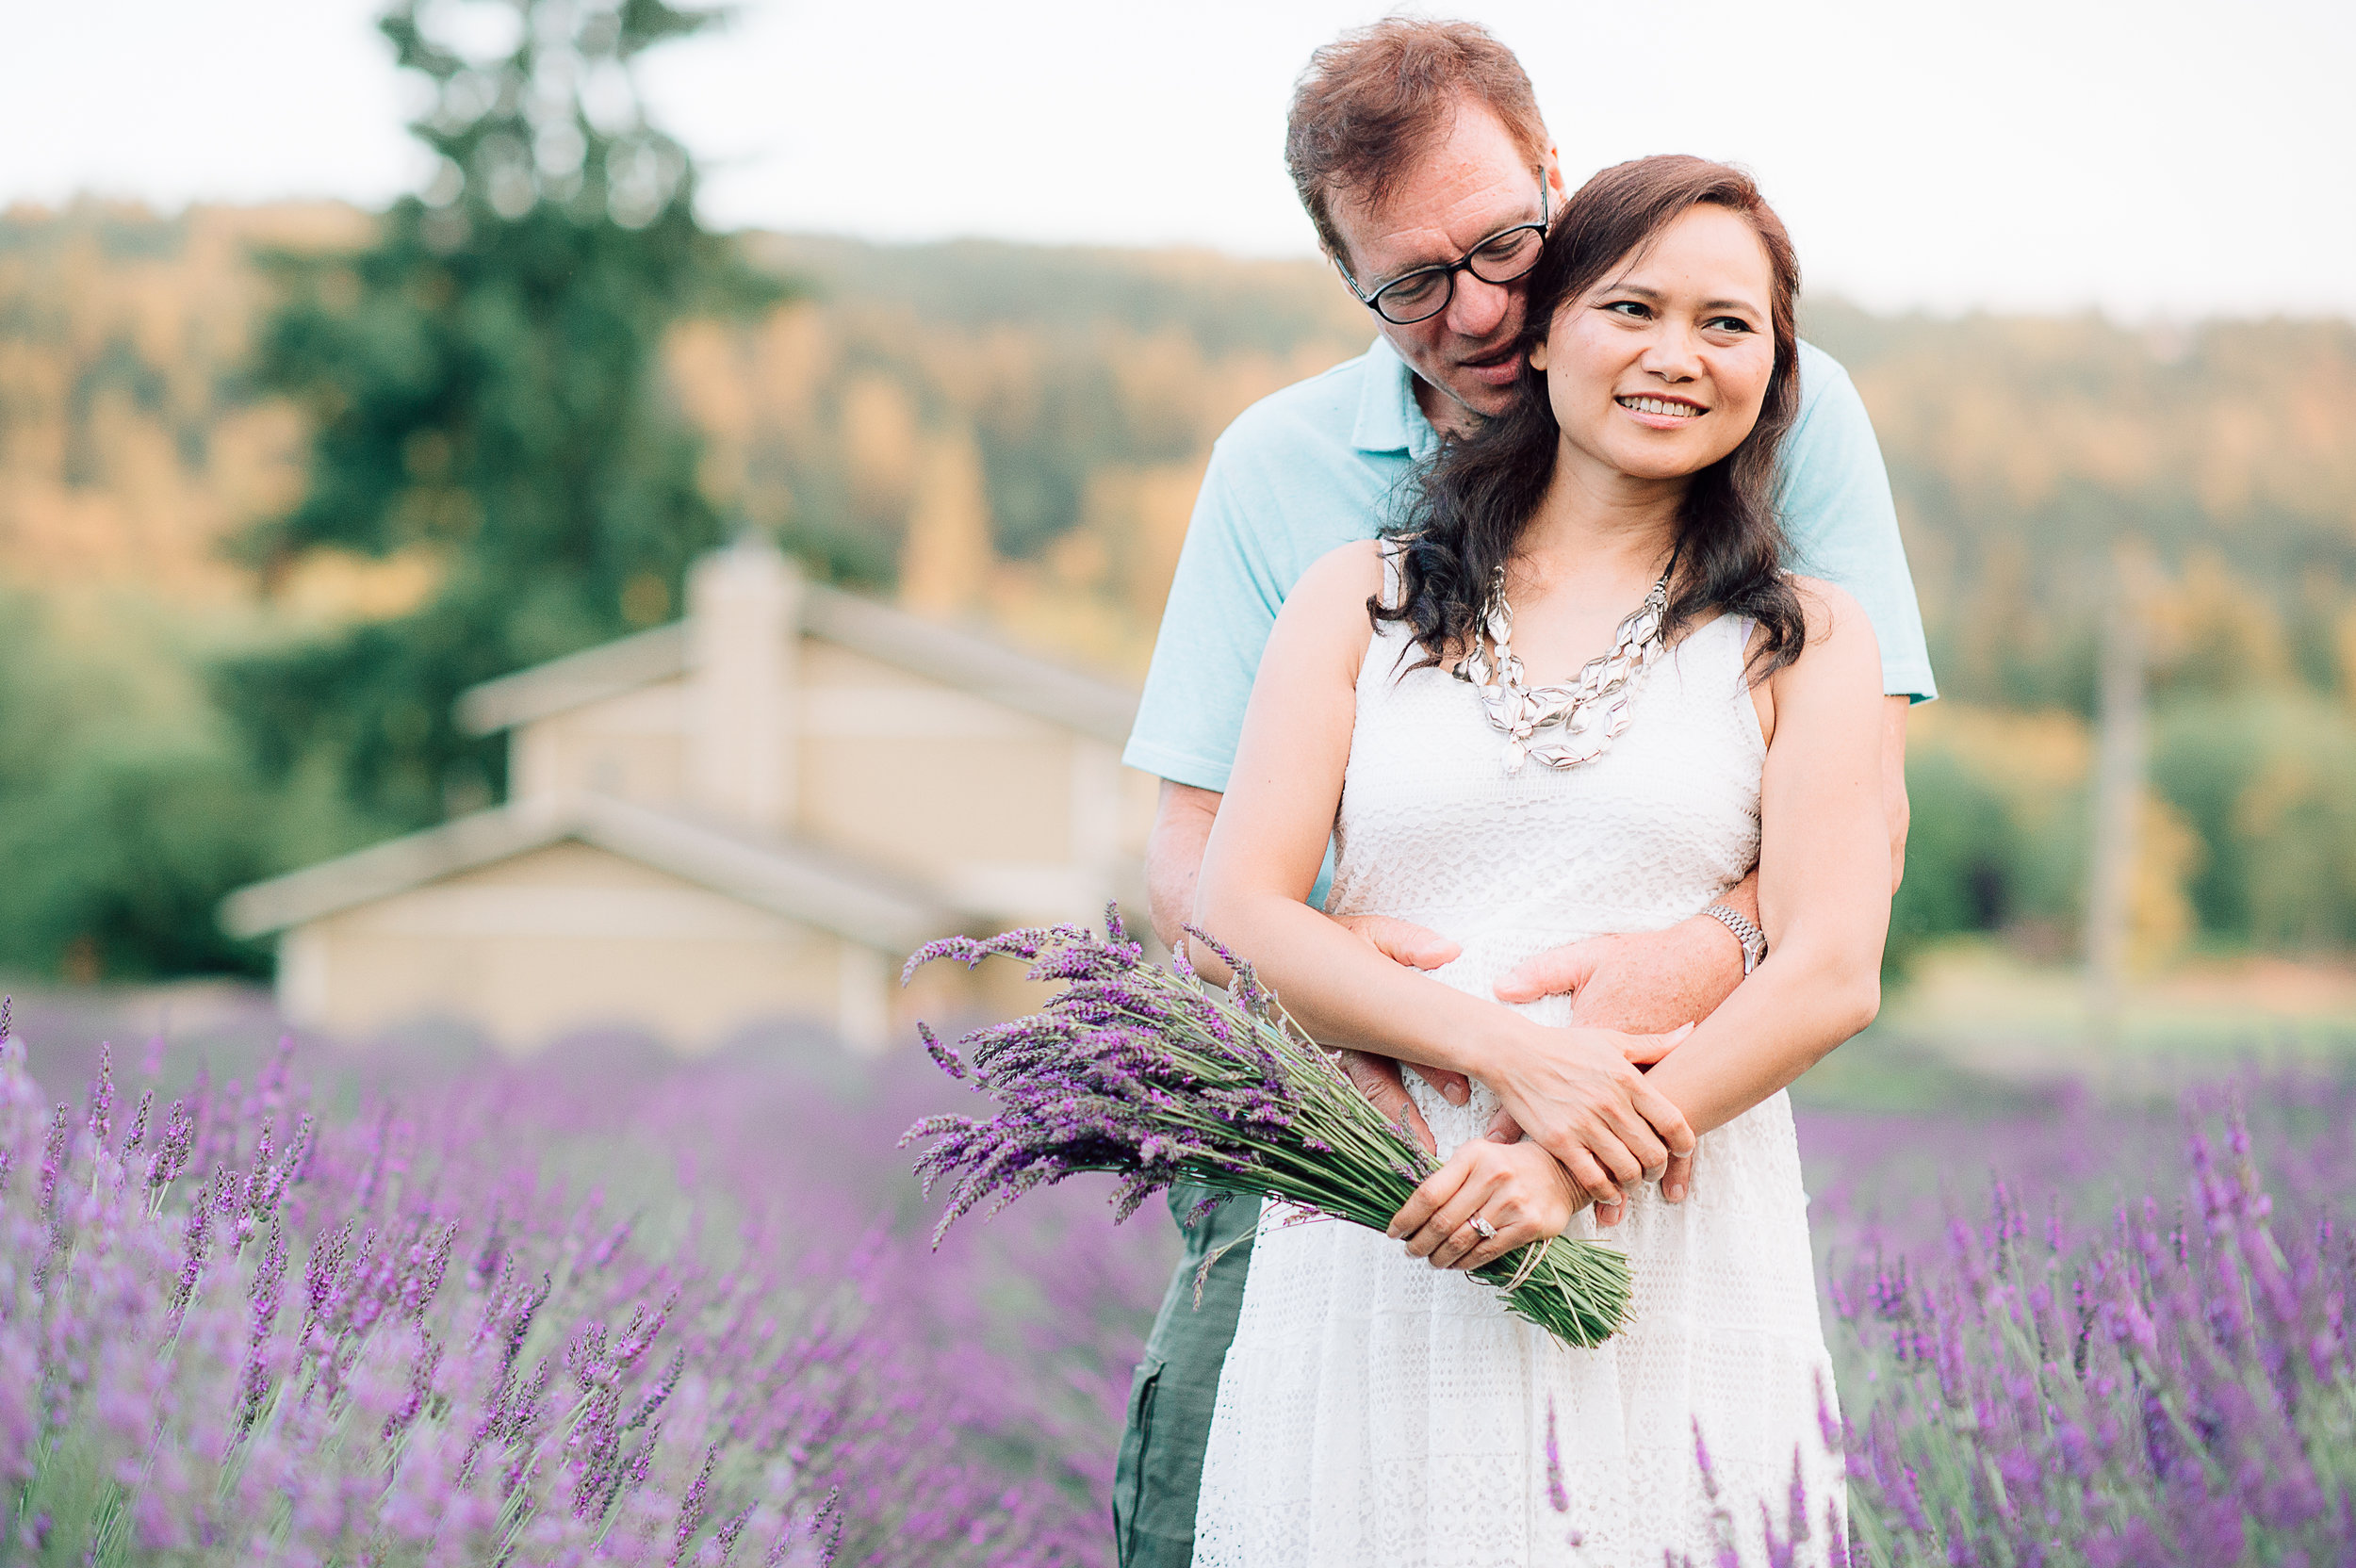 engagement_lavenderfield_youseephotography_LidiaOtto (67).jpg